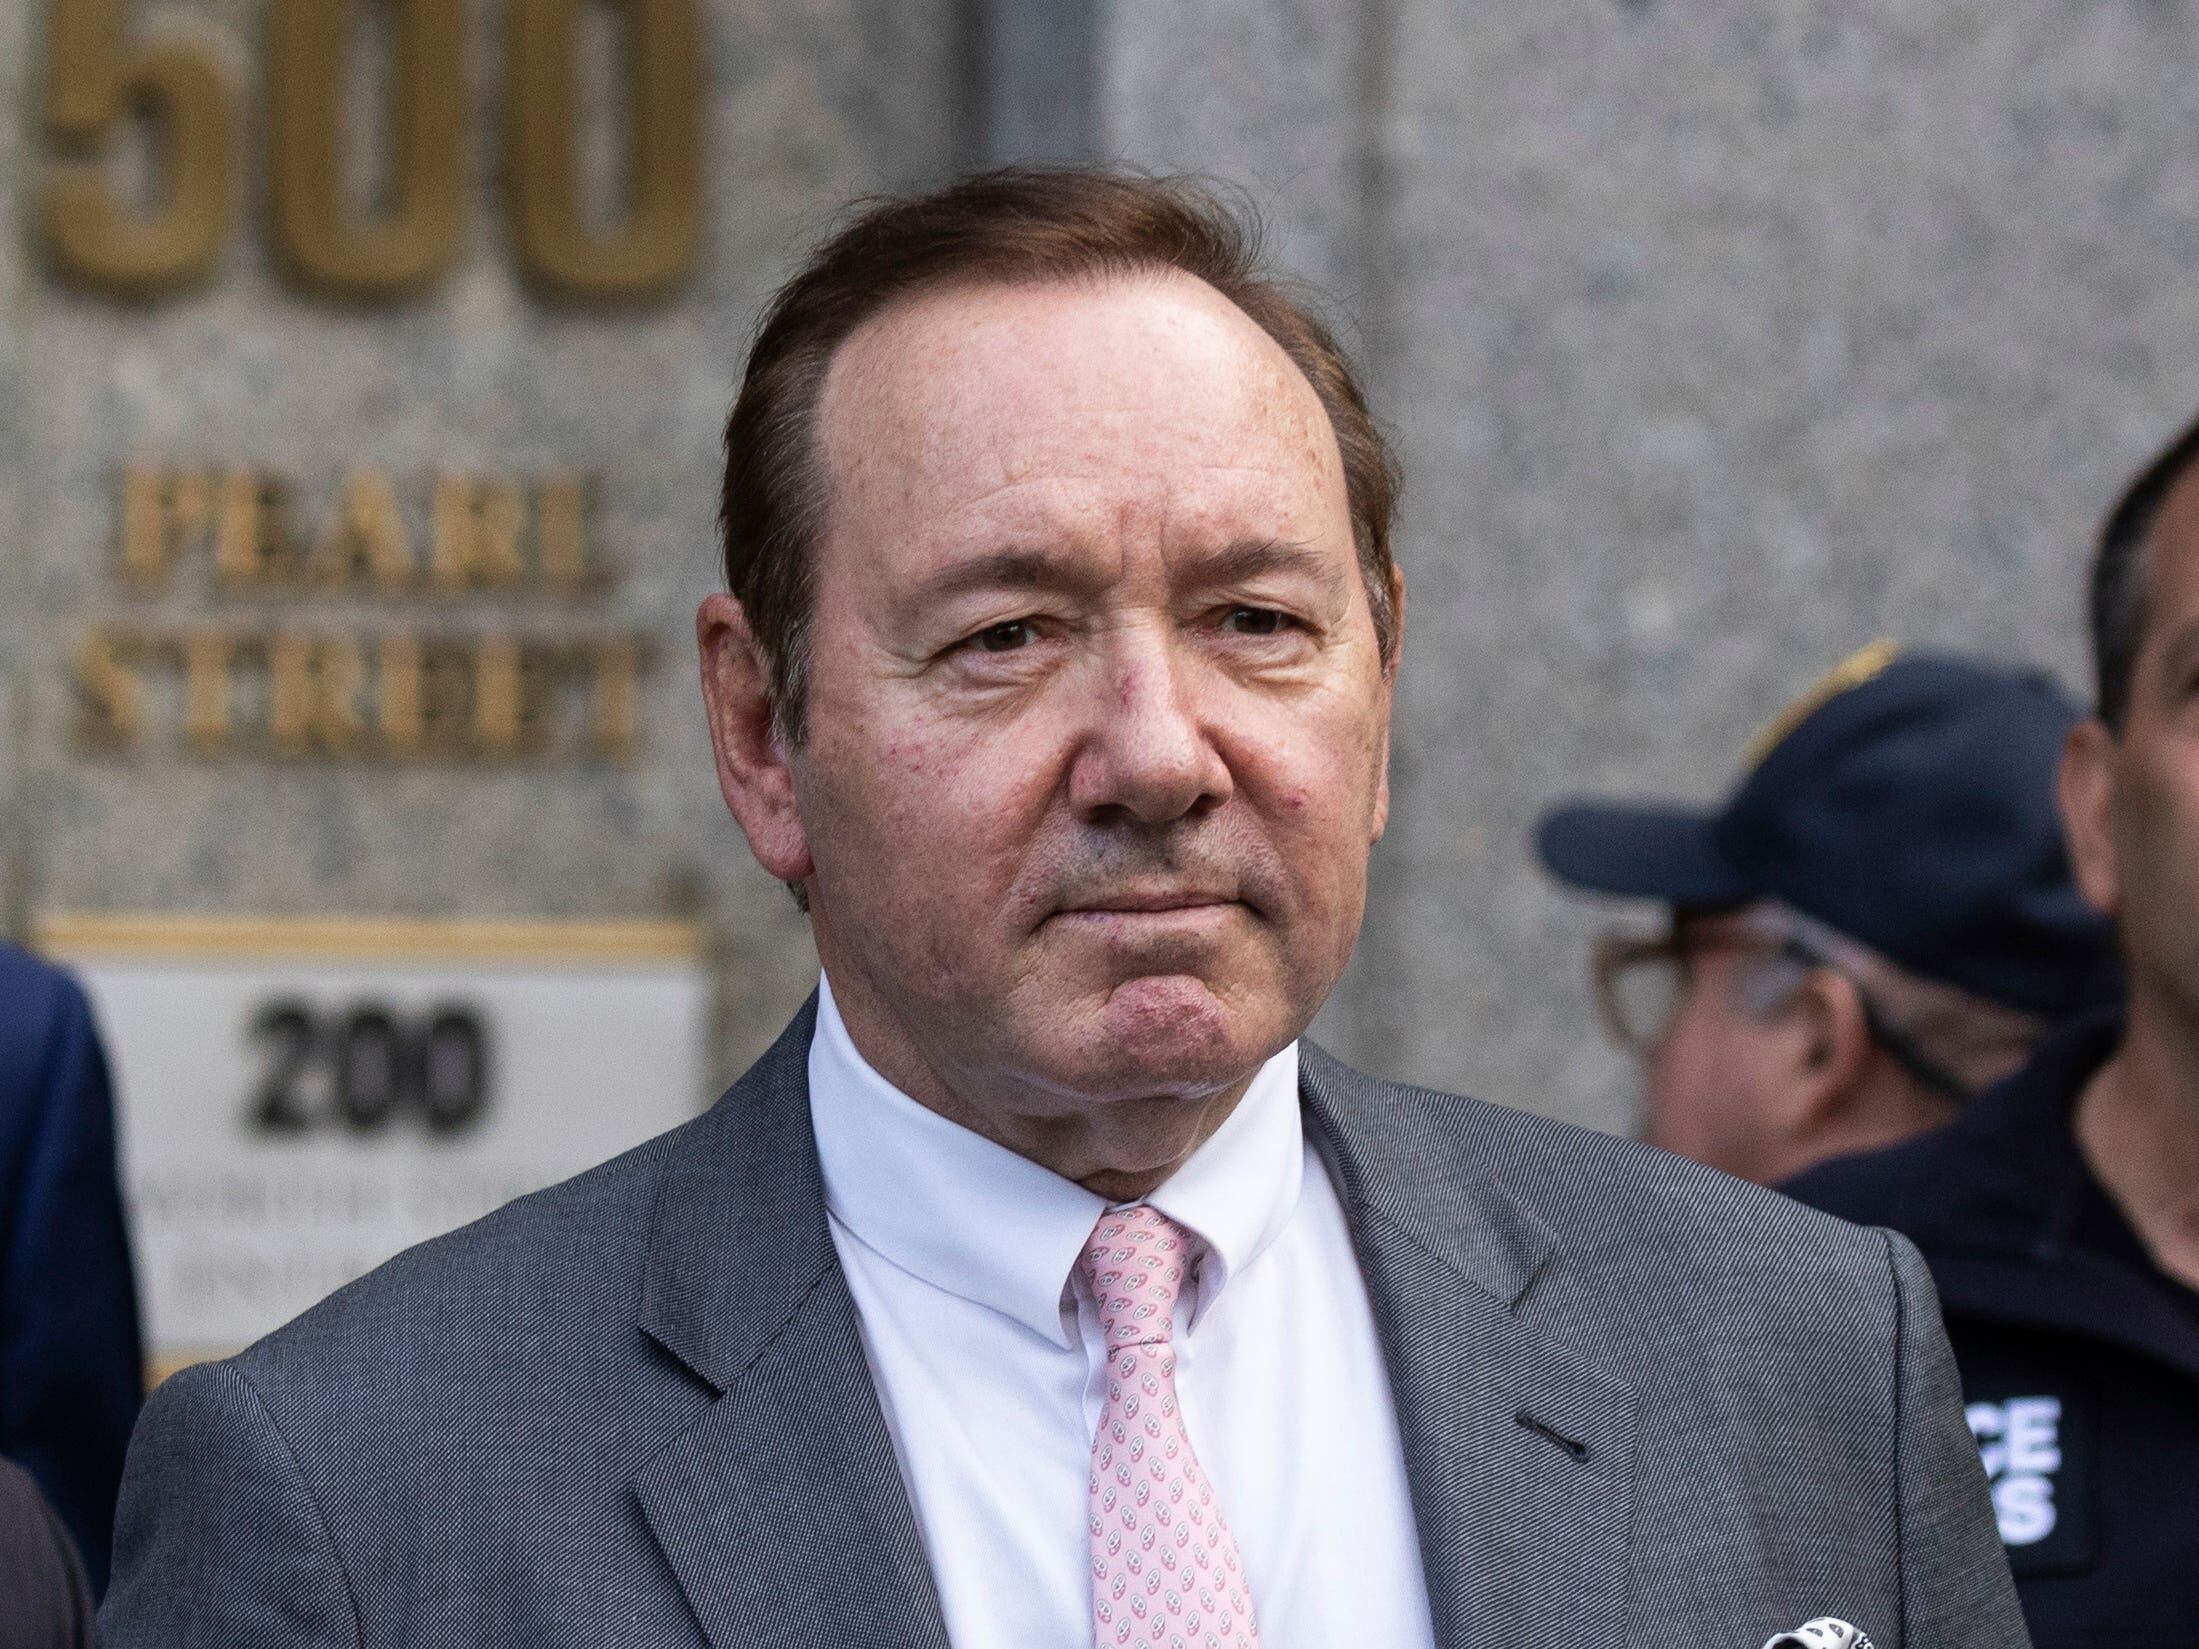 Jury: Kevin Spacey did not molest actor Anthony Rapp in 1986